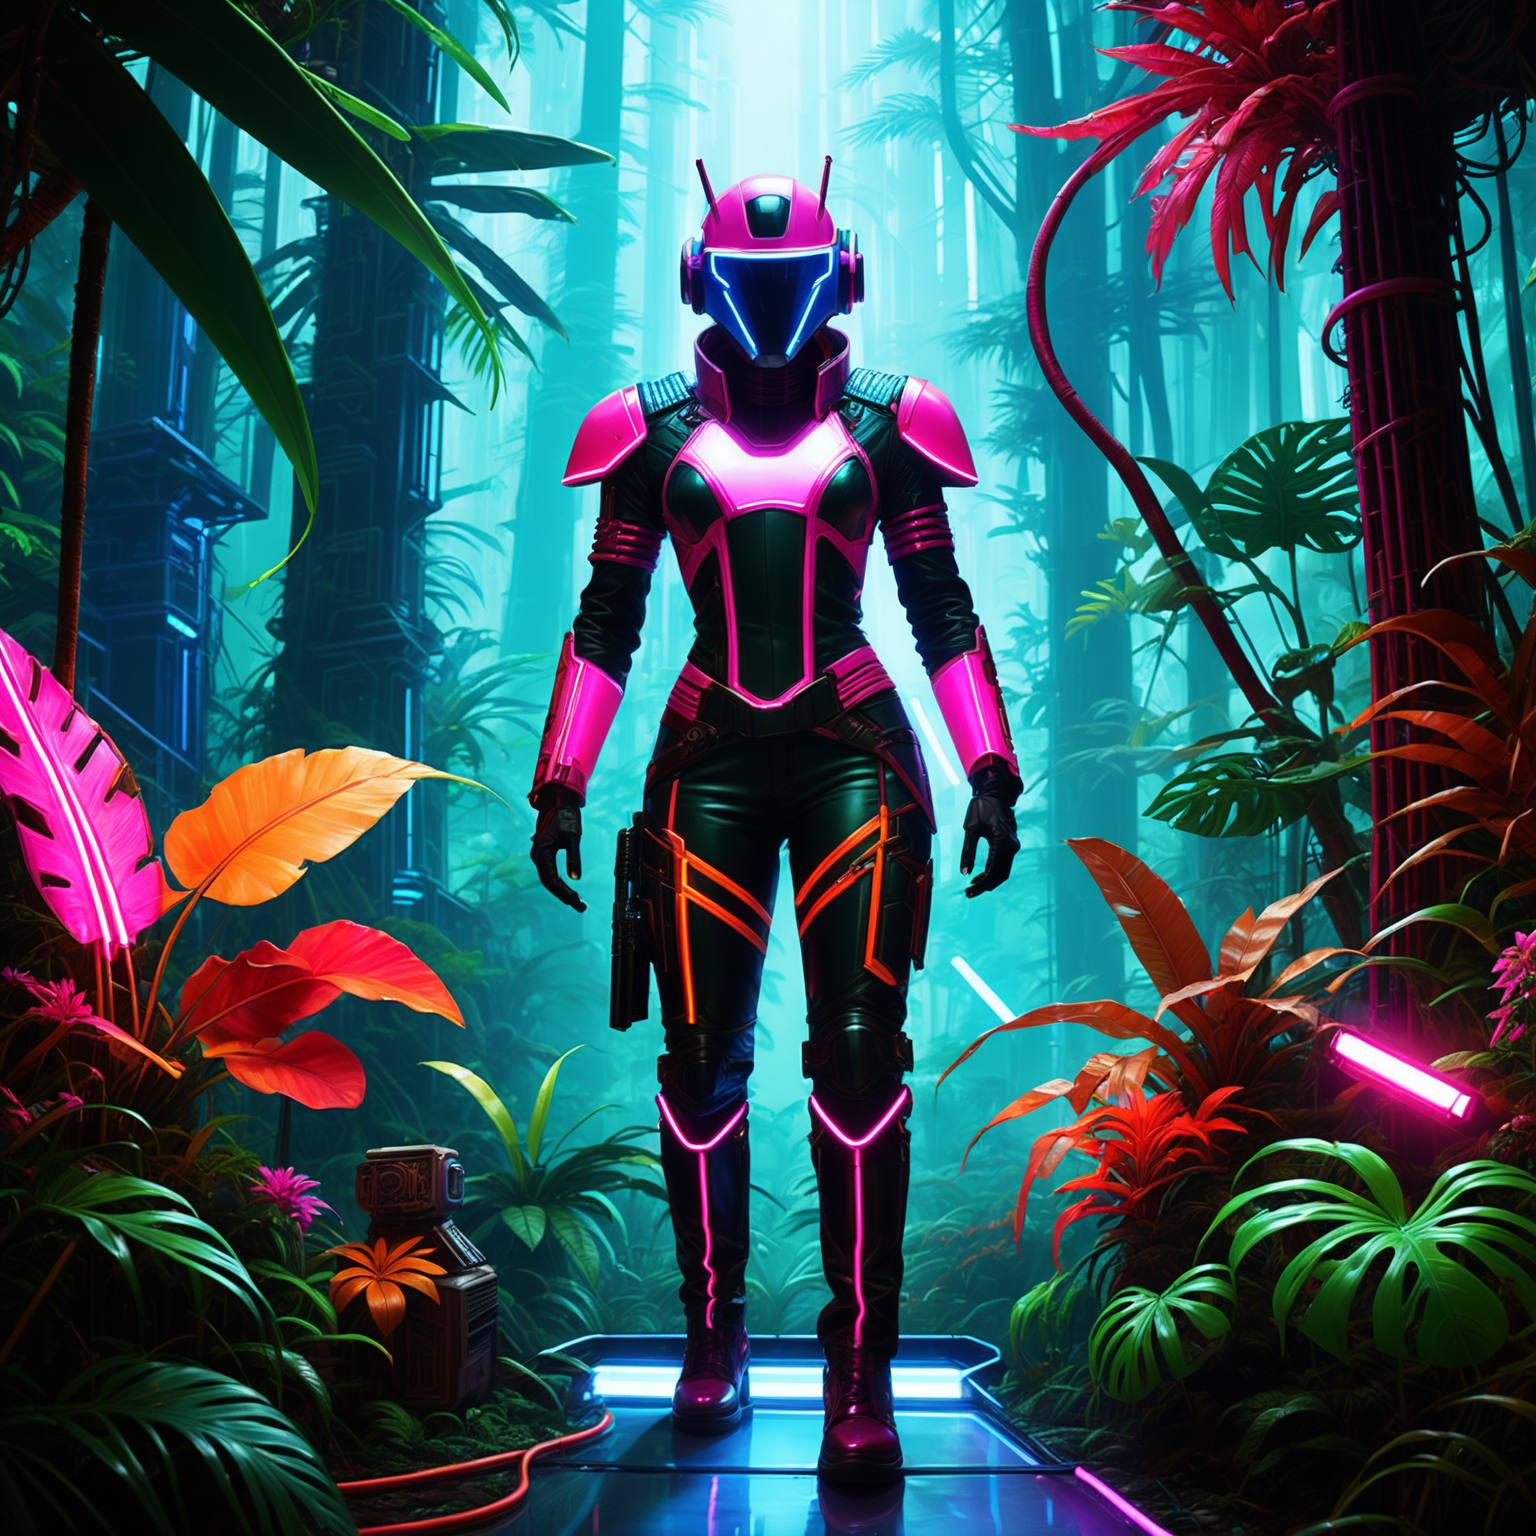 Neon Jungle Android exploring a dense forest illuminated by neon lights. The scene should have a cyberpunk aesthetic with ...